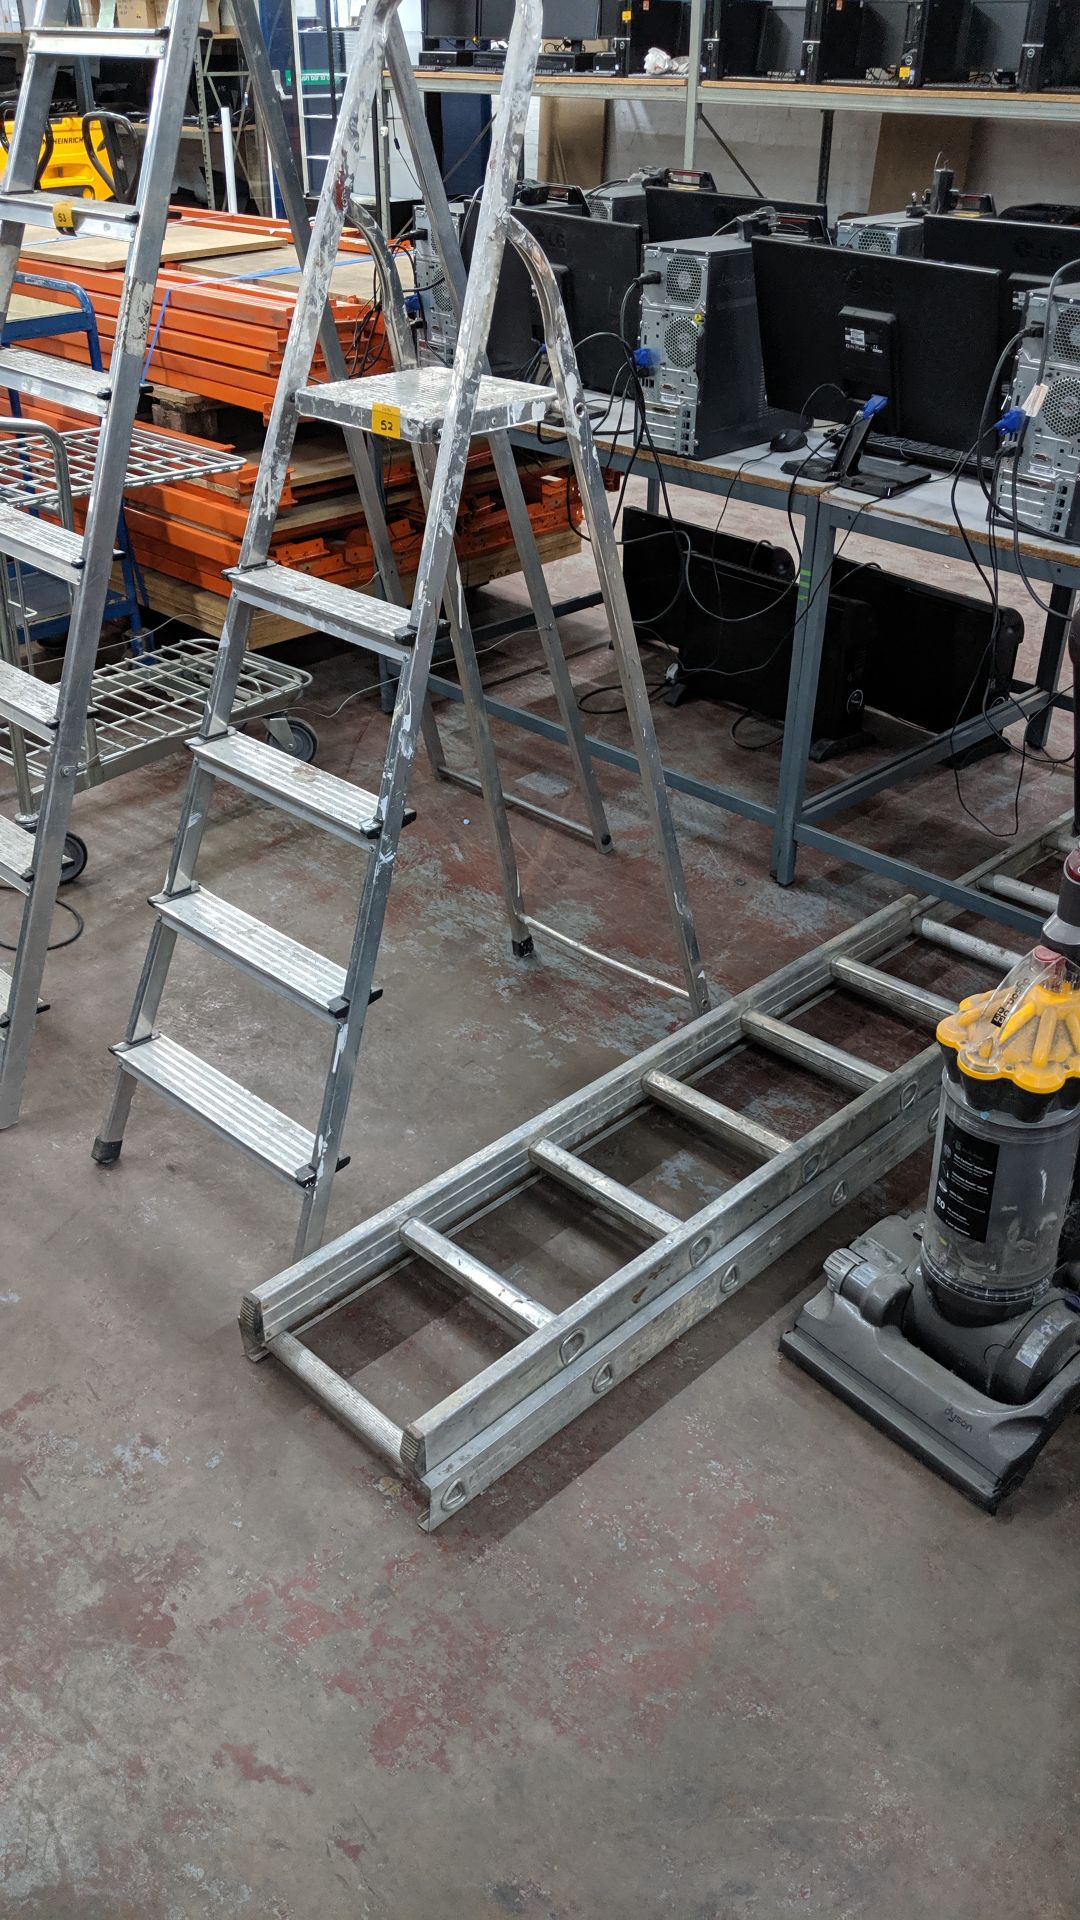 Stepladders plus 2 small rung ladders. This is one of a number of lots being sold on behalf of the - Image 3 of 3